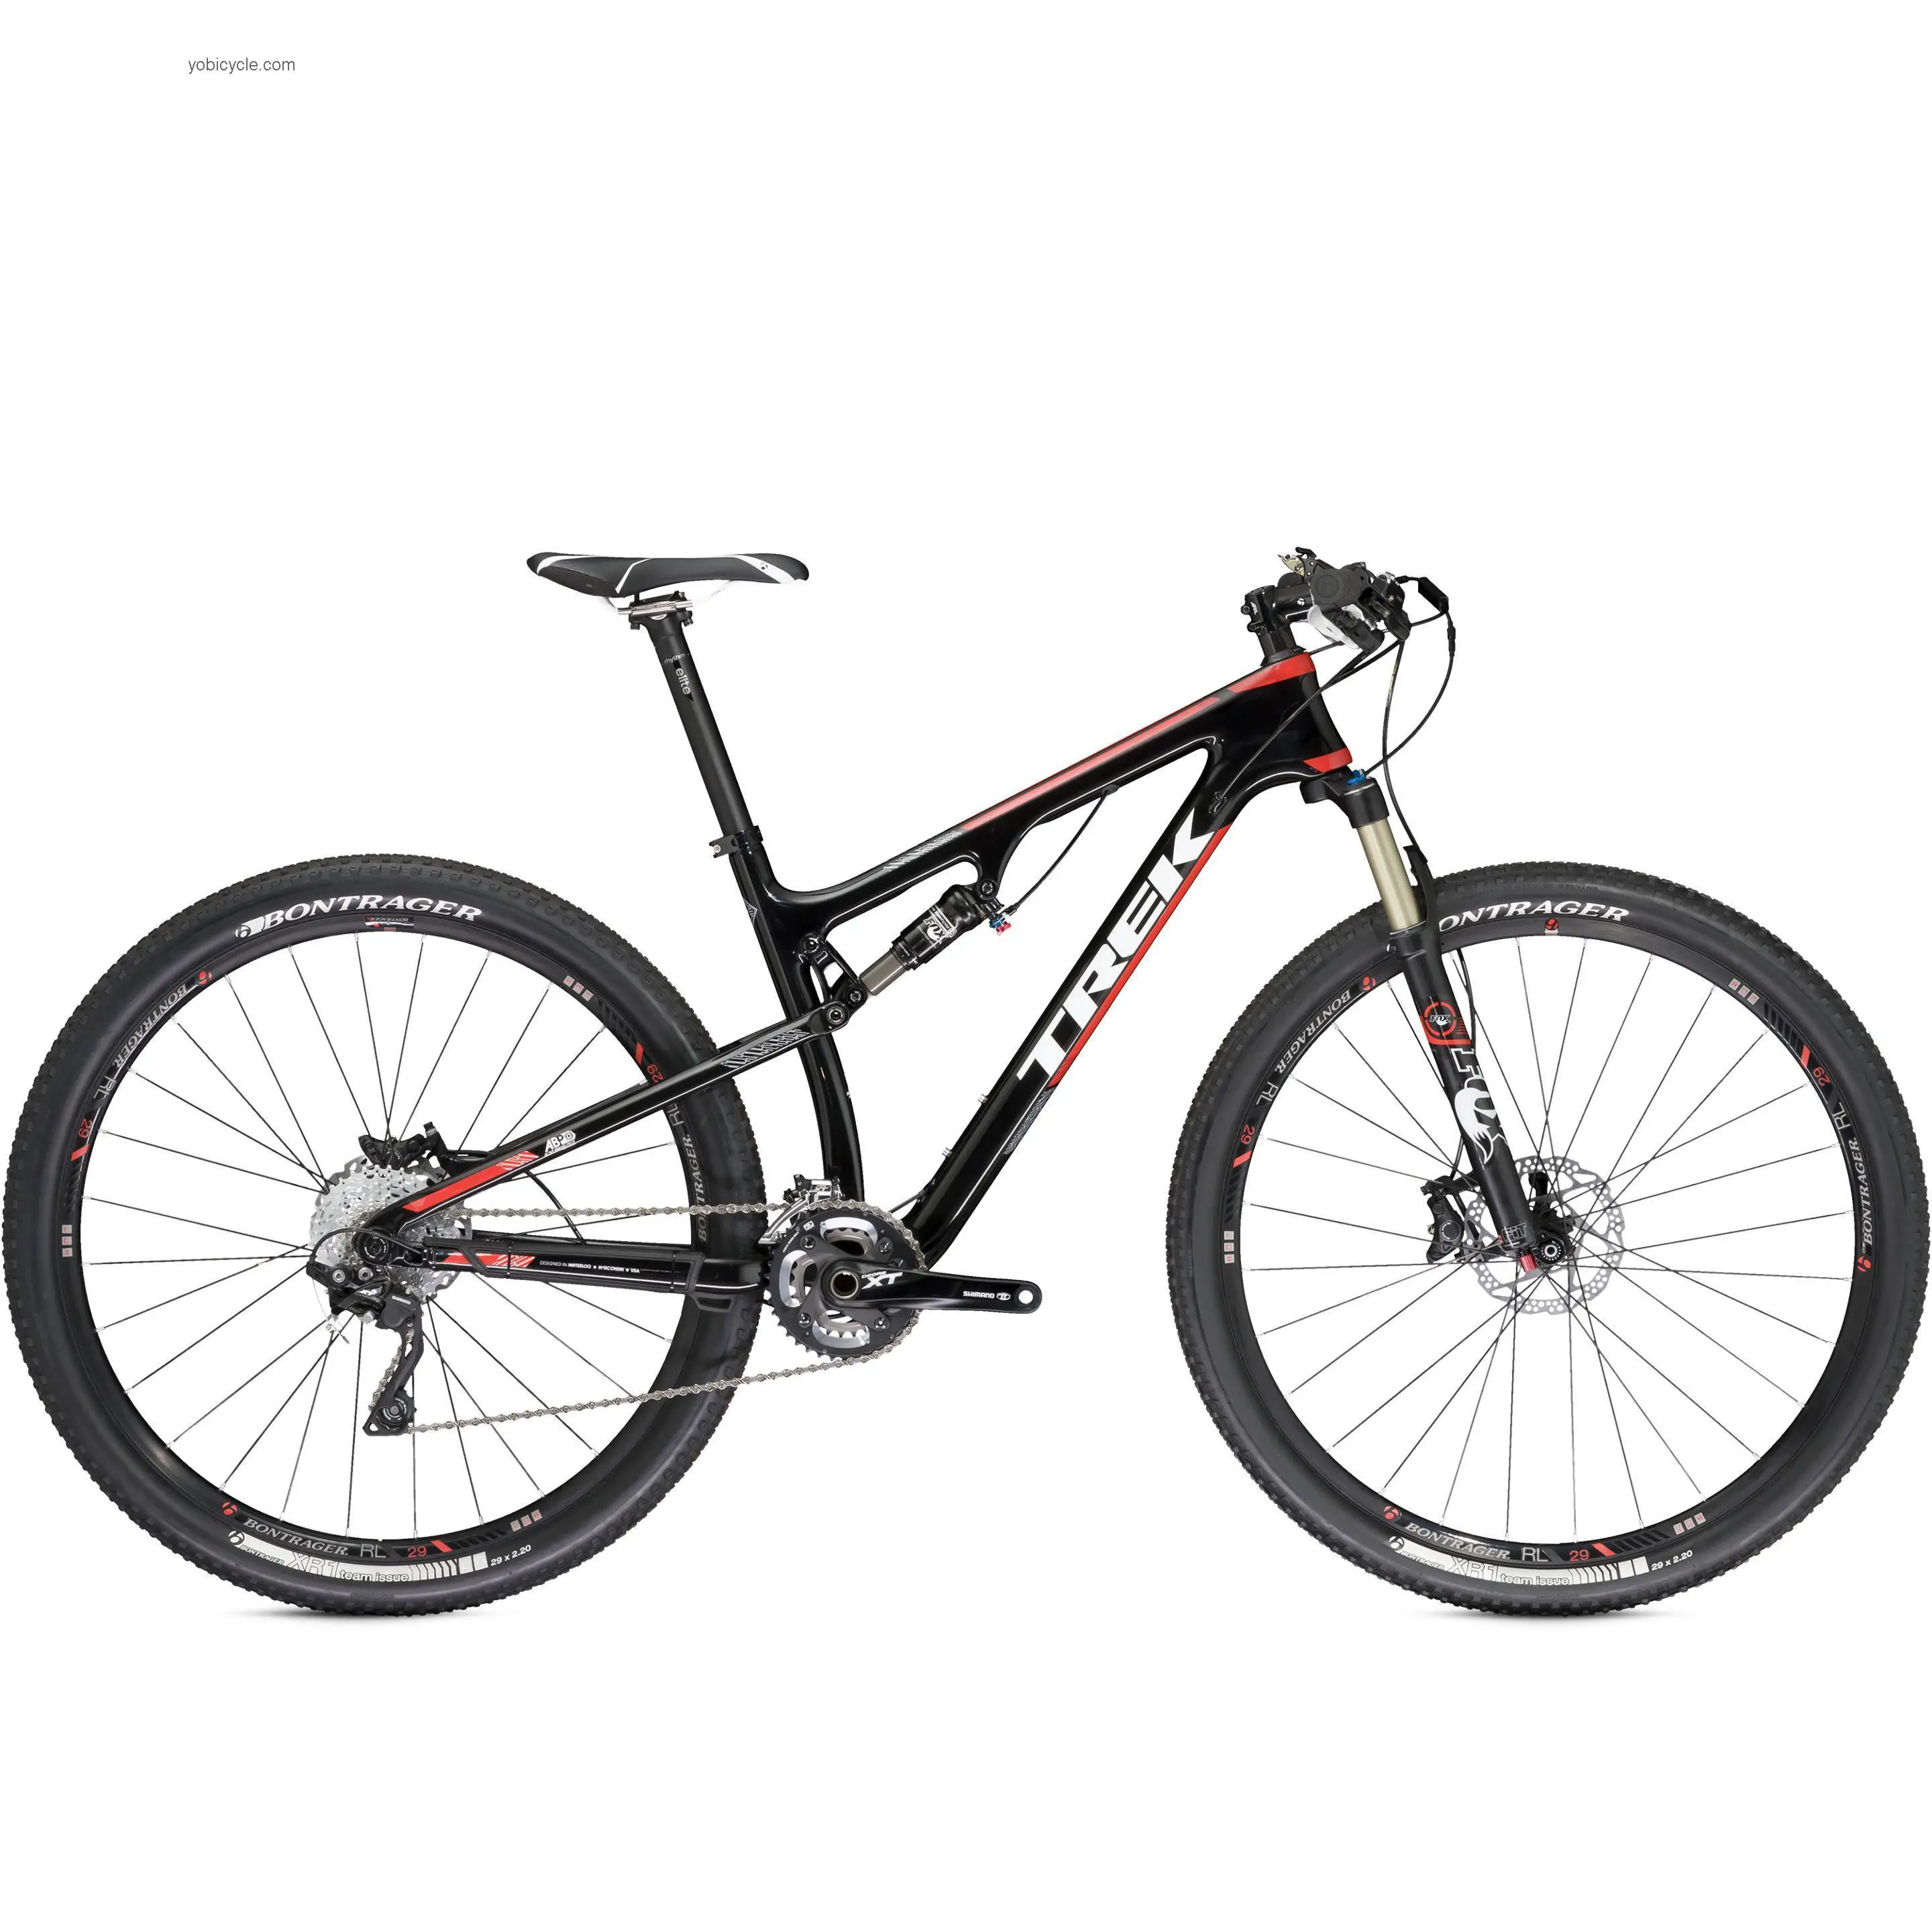 Trek Superfly FS 9.8 SL competitors and comparison tool online specs and performance